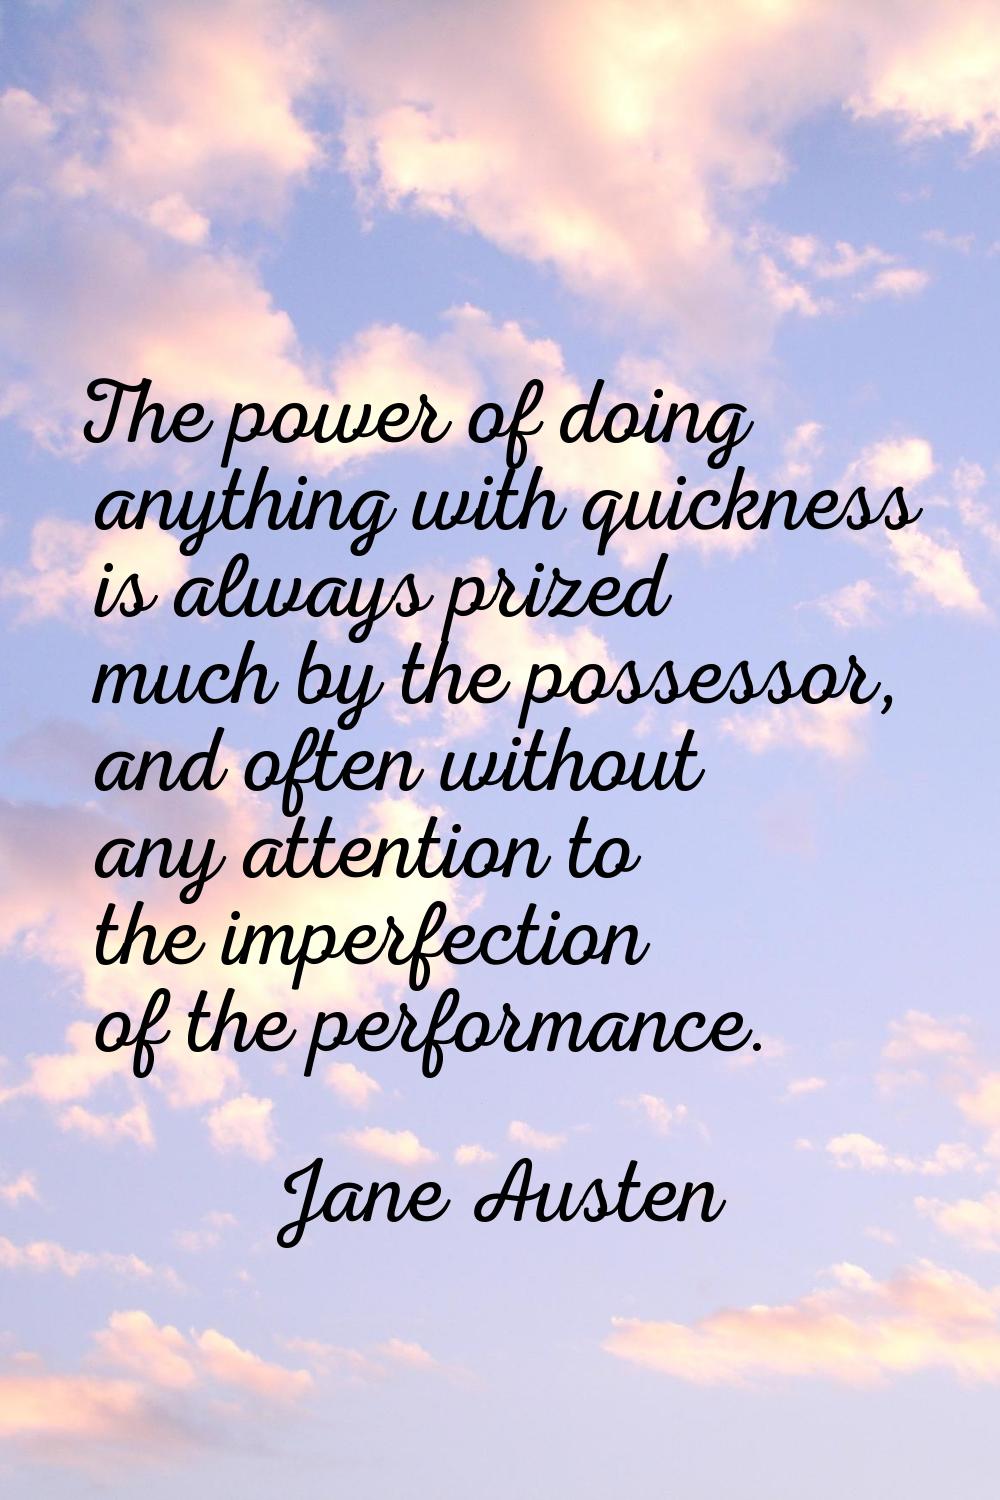 The power of doing anything with quickness is always prized much by the possessor, and often withou